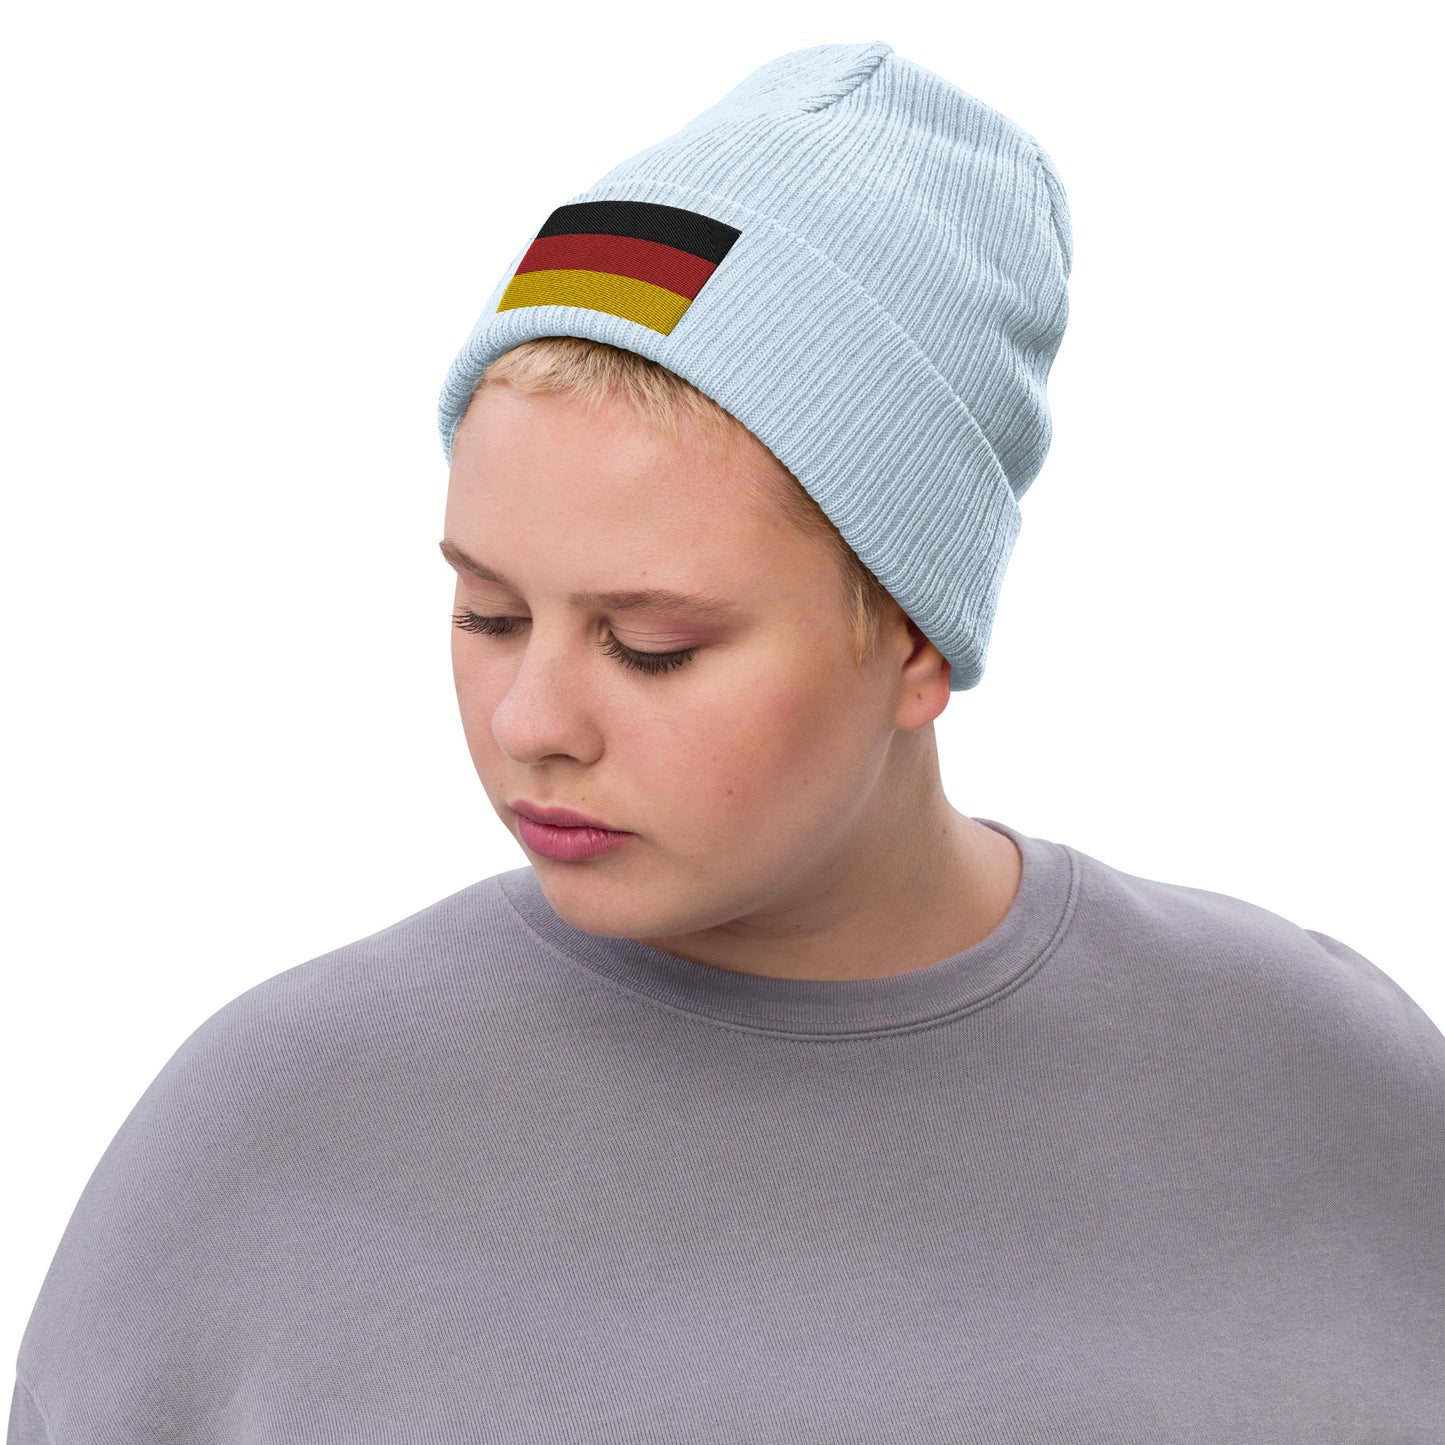 German Beanie / Premium Quality / Embroidered Flag Of Germany / 8 Colors / Recycled Polyester Clothing / light blue